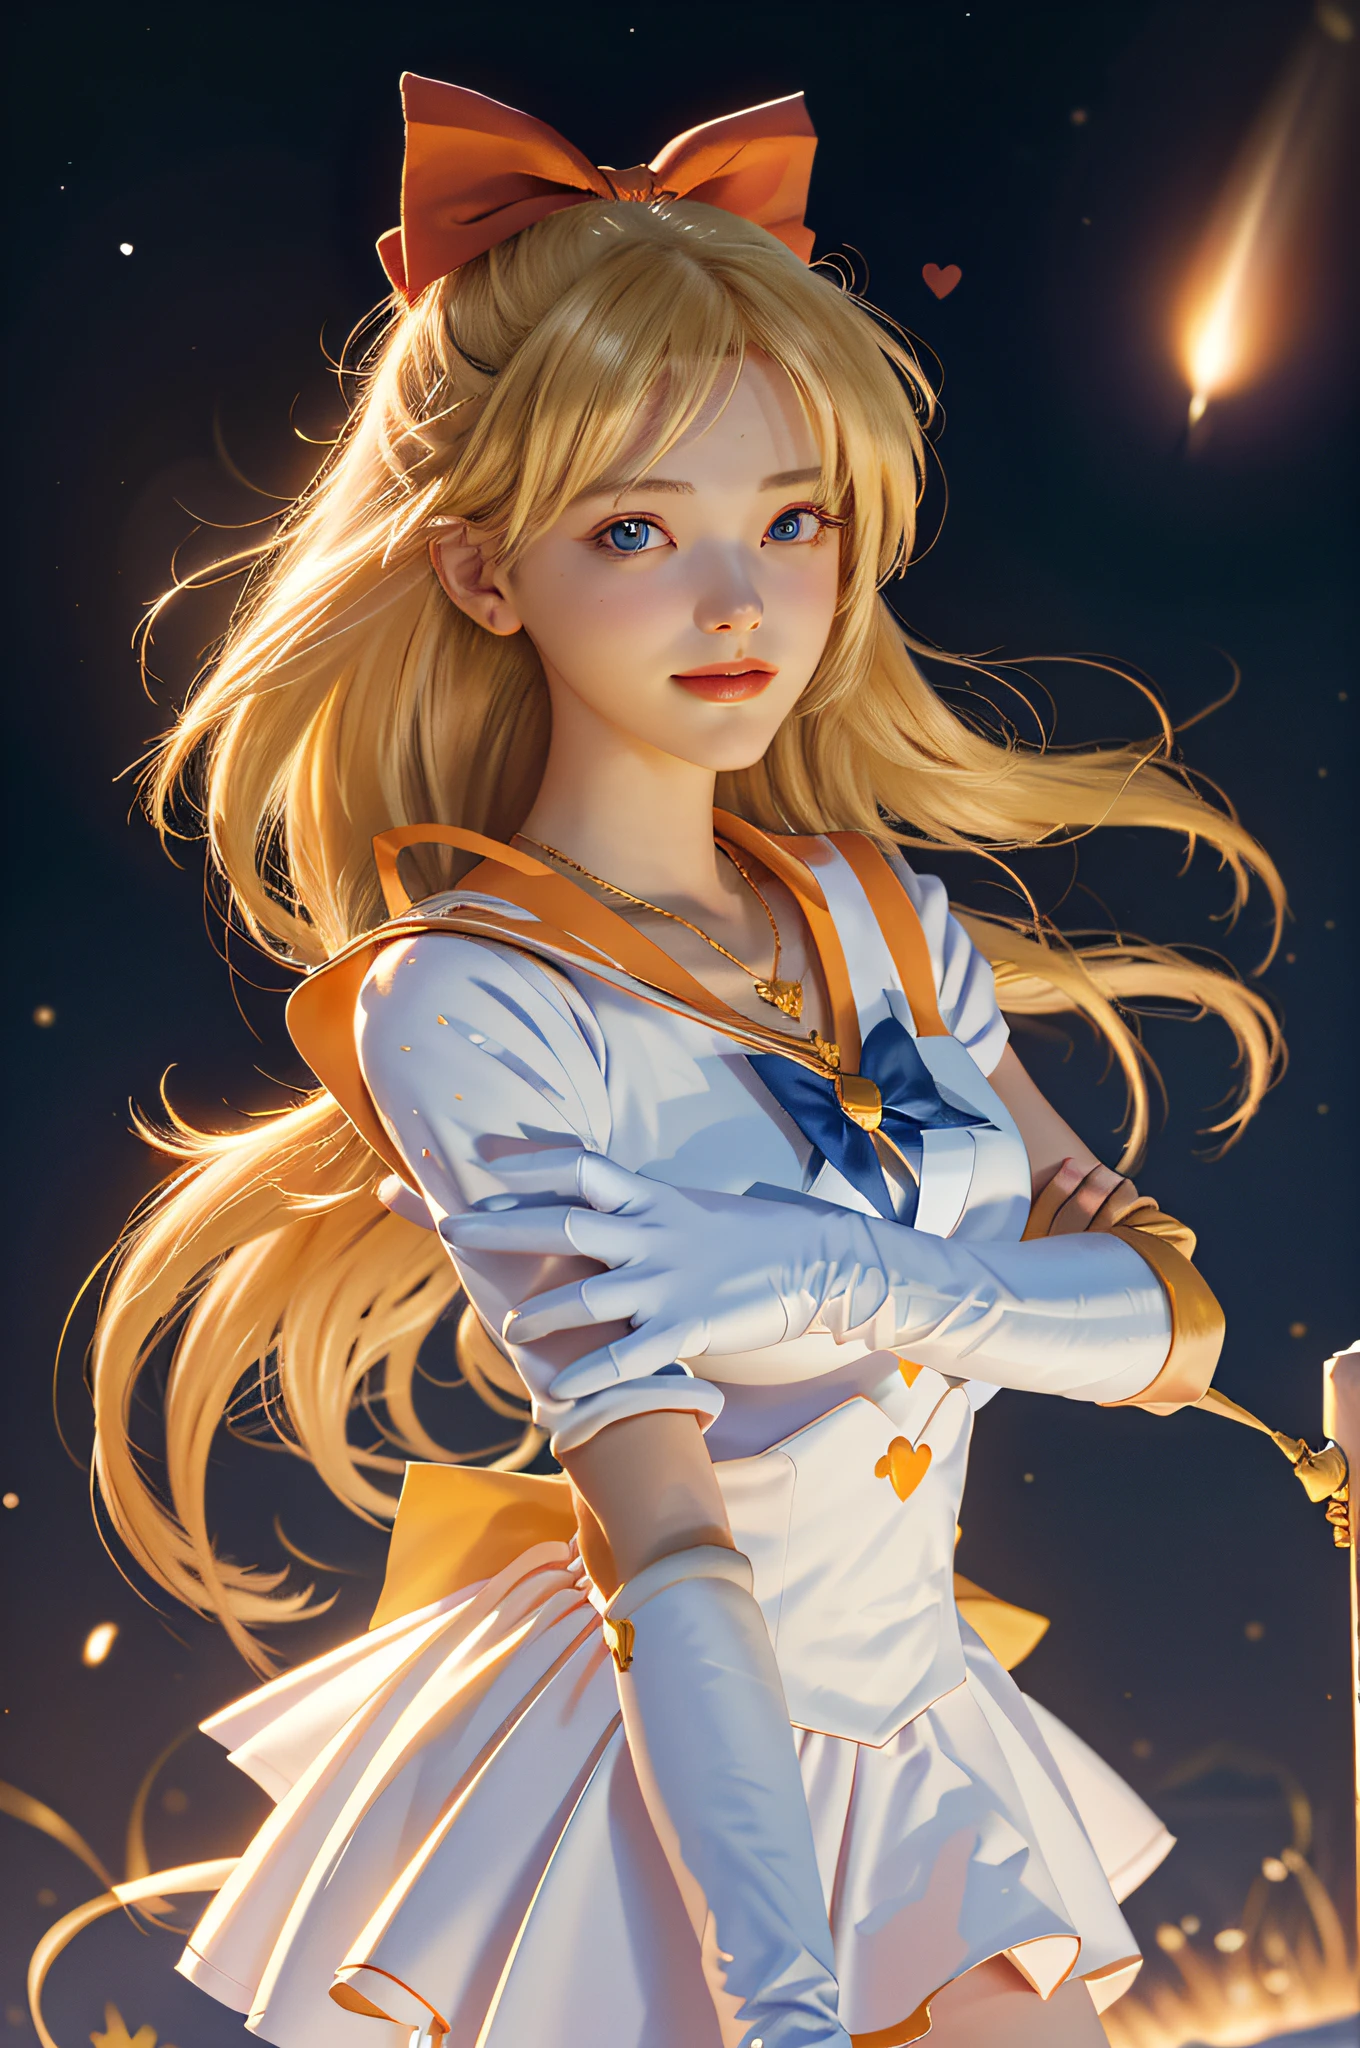 (Masterpiece, best quality; 1.3), extremely detailed CG, super detailed, 1 girl, solo, smile, look at the audience, stylish Ungle, long blonde hair, blue eyes, SV1, sailor senishi uniform, orange skirt, elbow gloves, tiara, orange sailor collar, red bow, orange necklace, white gloves, jewelry, many hearts, facial focus, venus, tornado, abstract background, heart storm, halt beam, heart bubble, heart bath, halt star, heart flower, heart lamp, heart world, heart background, galaxy background, heart weapon, heart halo,